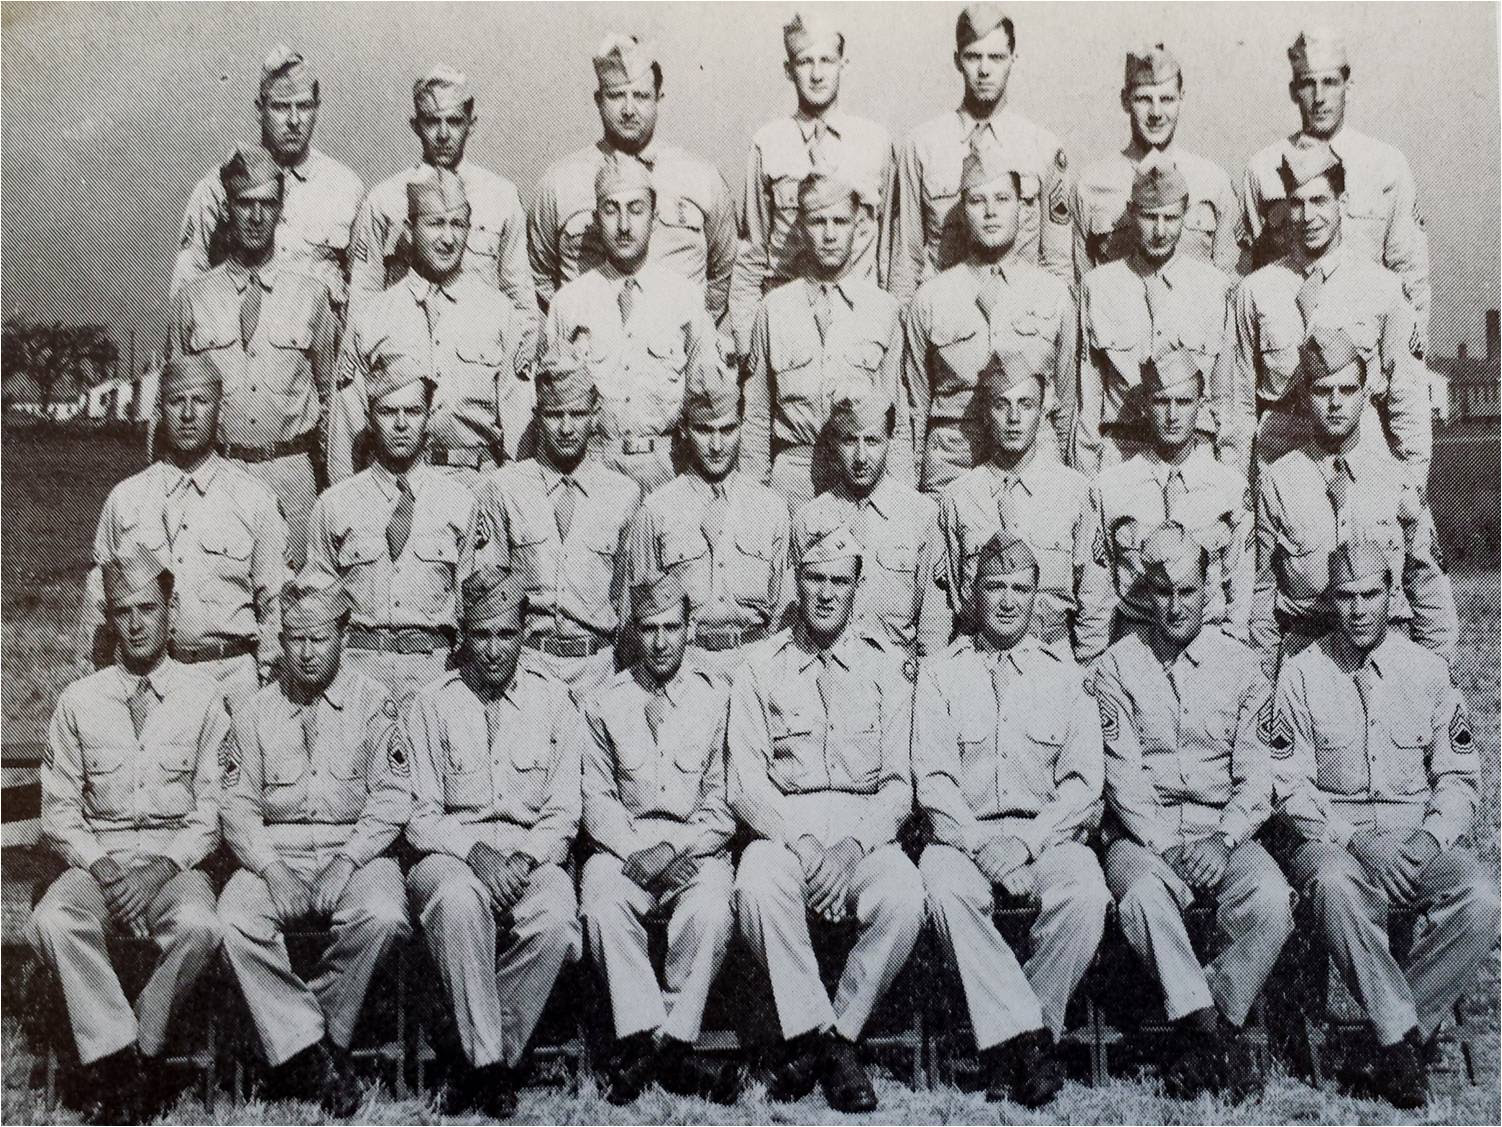 Master Sgt. Roddie Edmonds (front row, second from left) at Camp Atterbury, Indiana. (Courtesy of Yad Vashem)